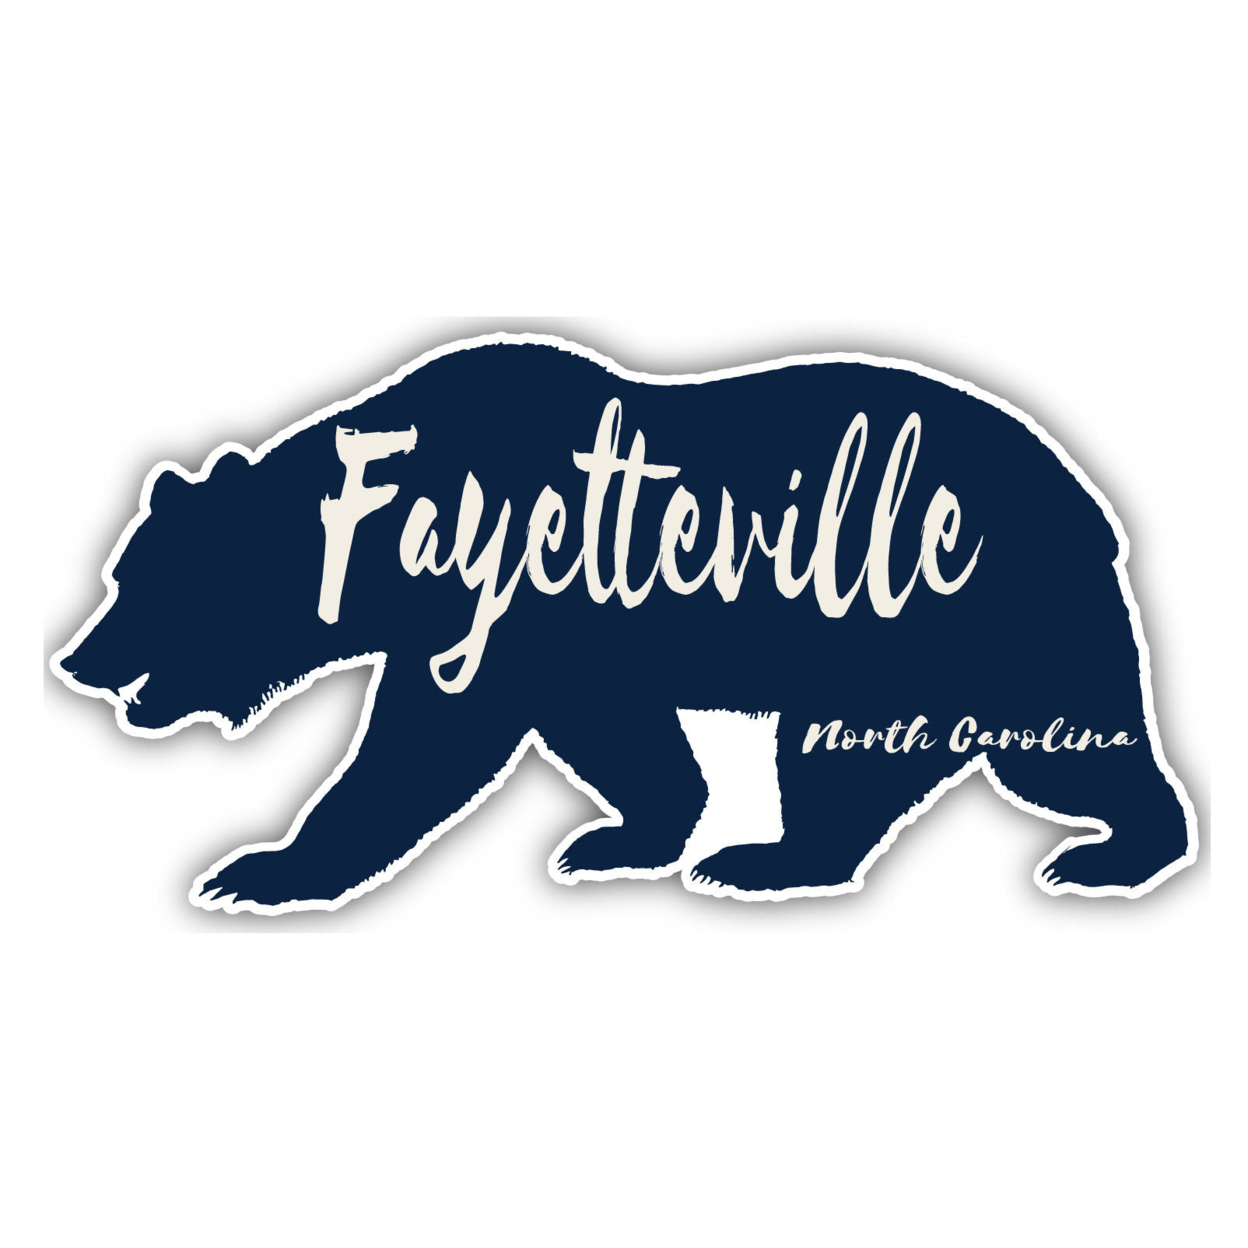 Fayetteville North Carolina Souvenir Decorative Stickers (Choose Theme And Size) - 4-Pack, 8-Inch, Bear